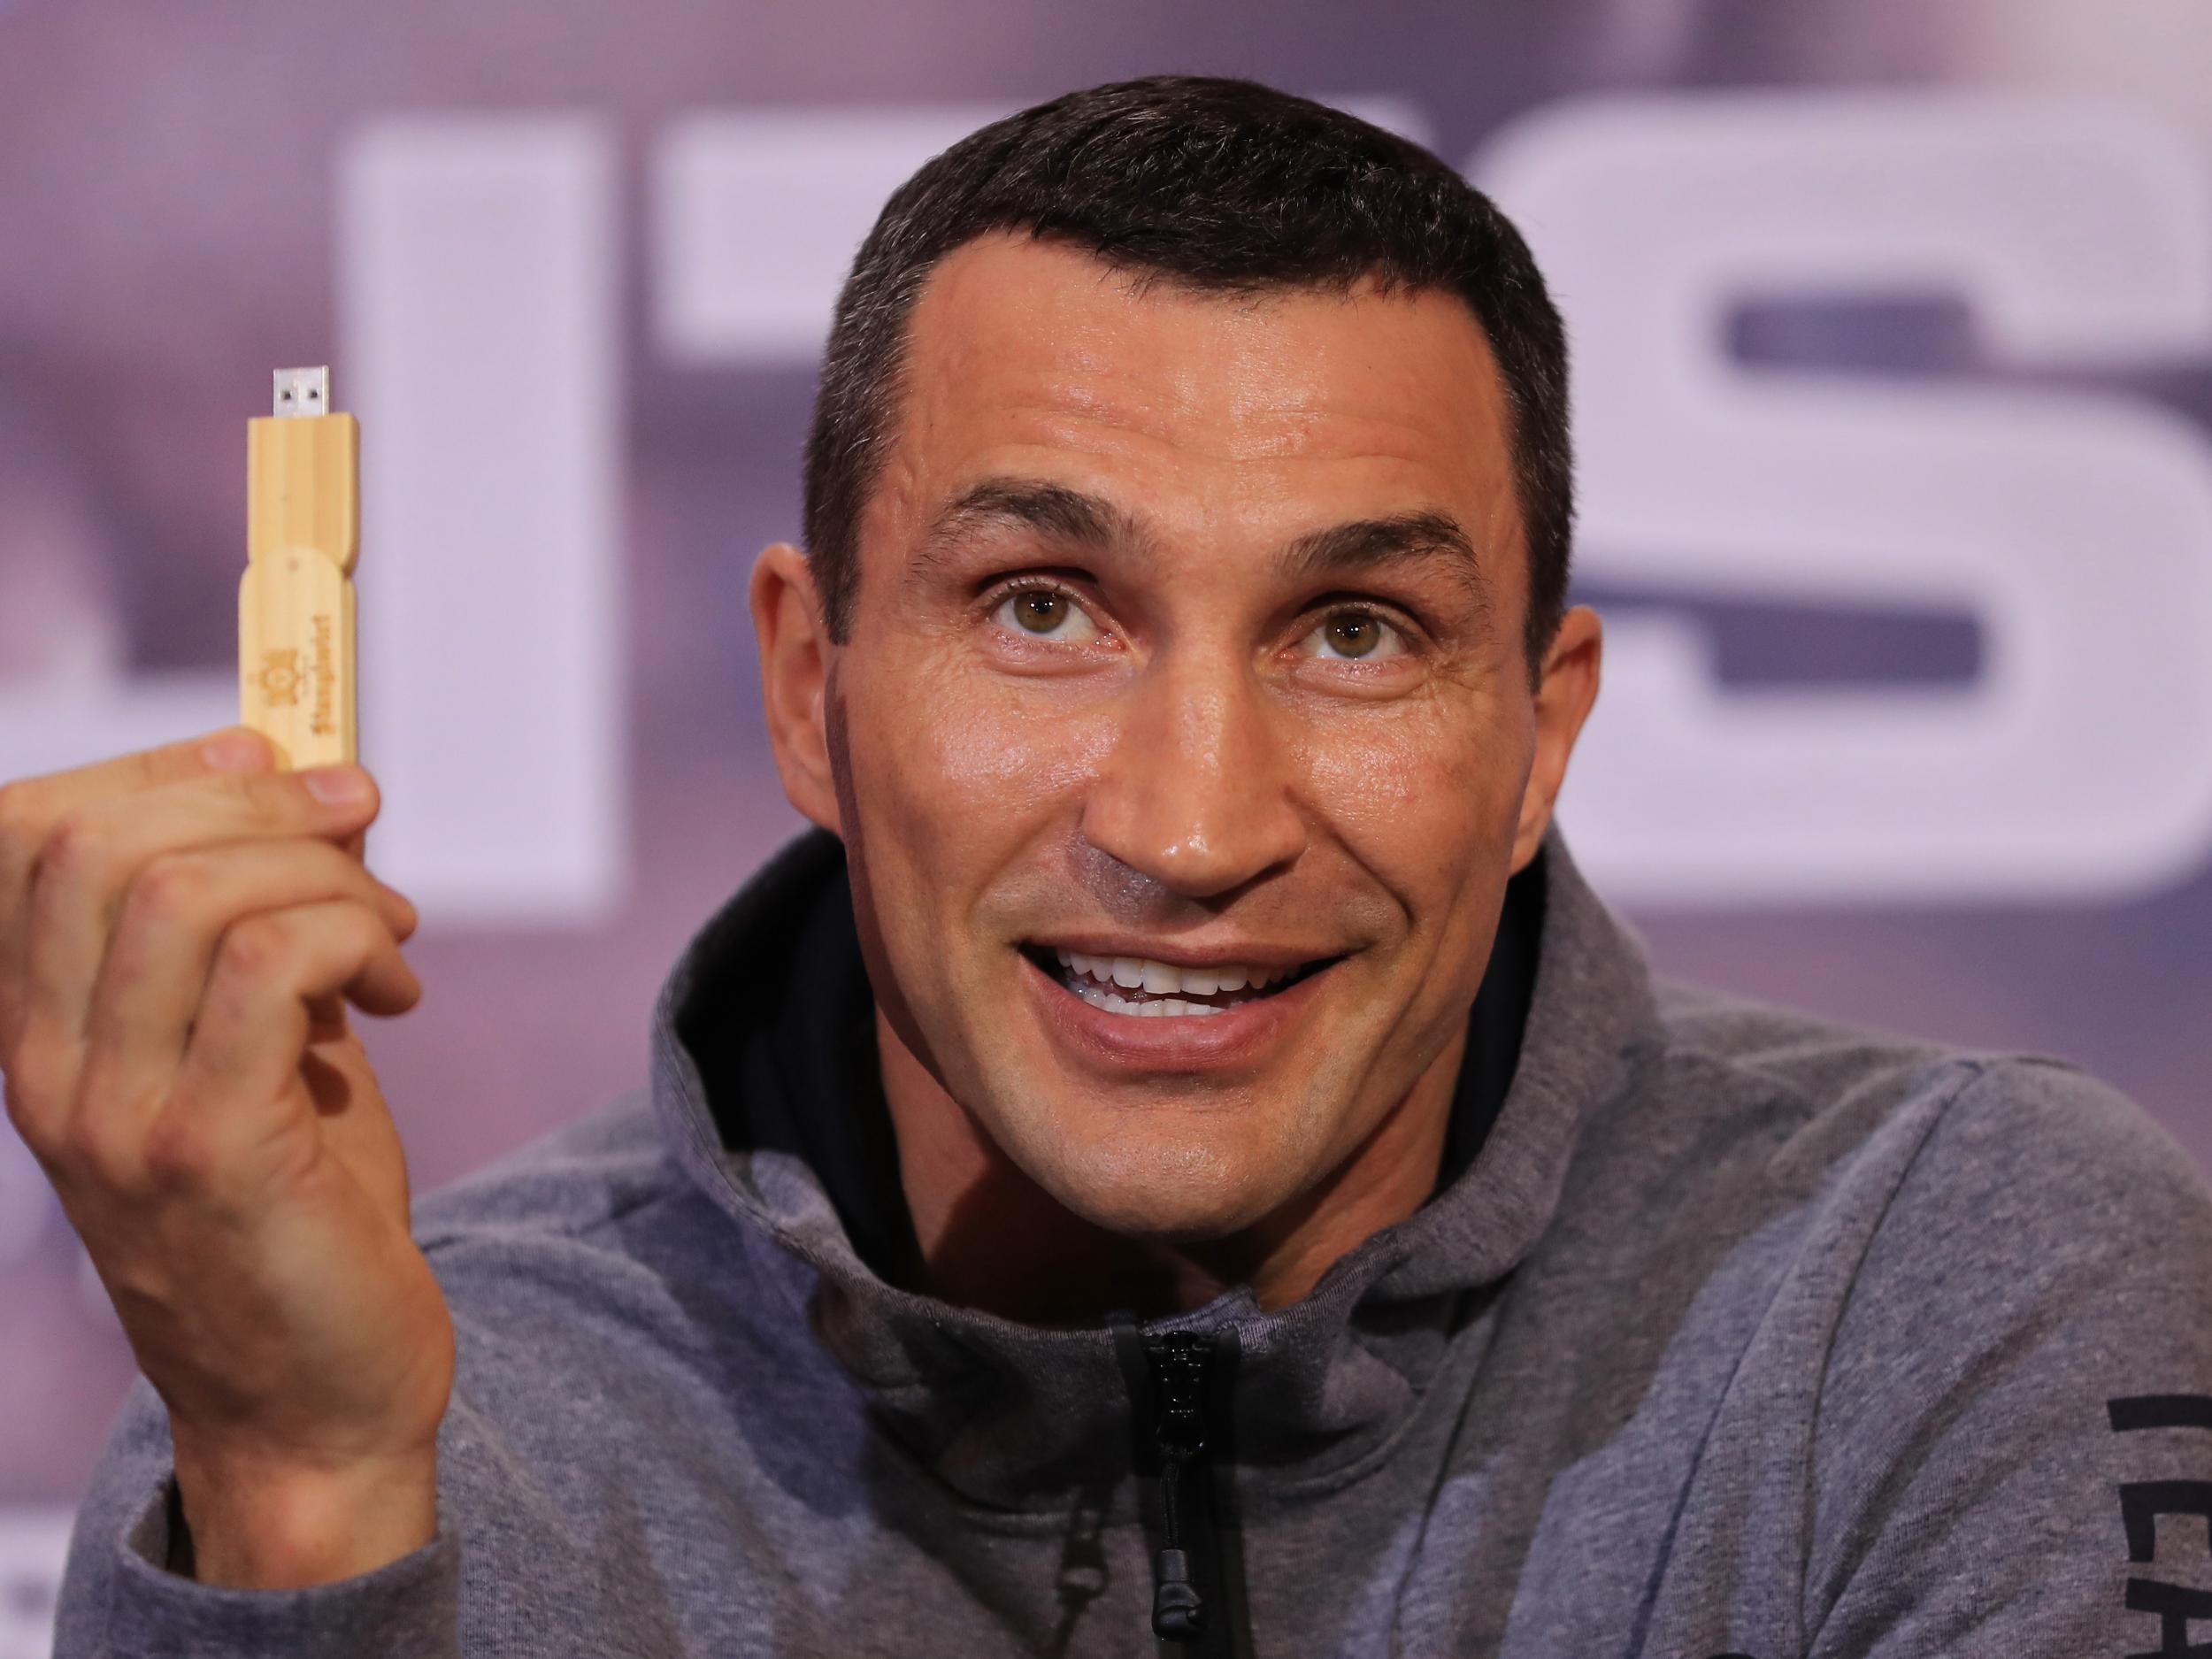 Wladimir Klitschko retired after his defeat by Anthony Joshua